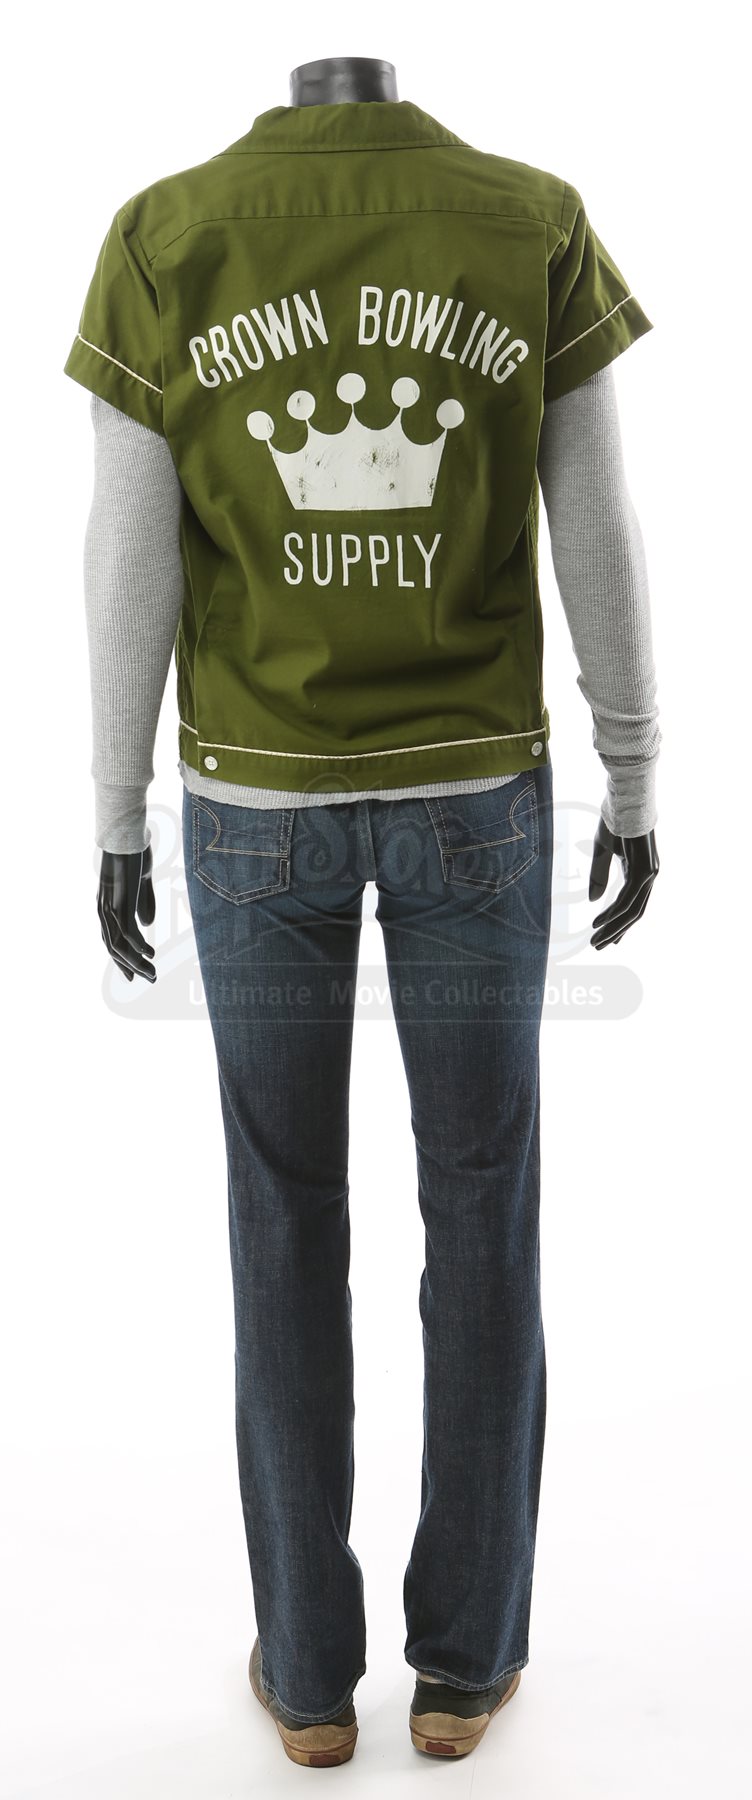 Bella Swan’s First Day Costume - Current price: $2750